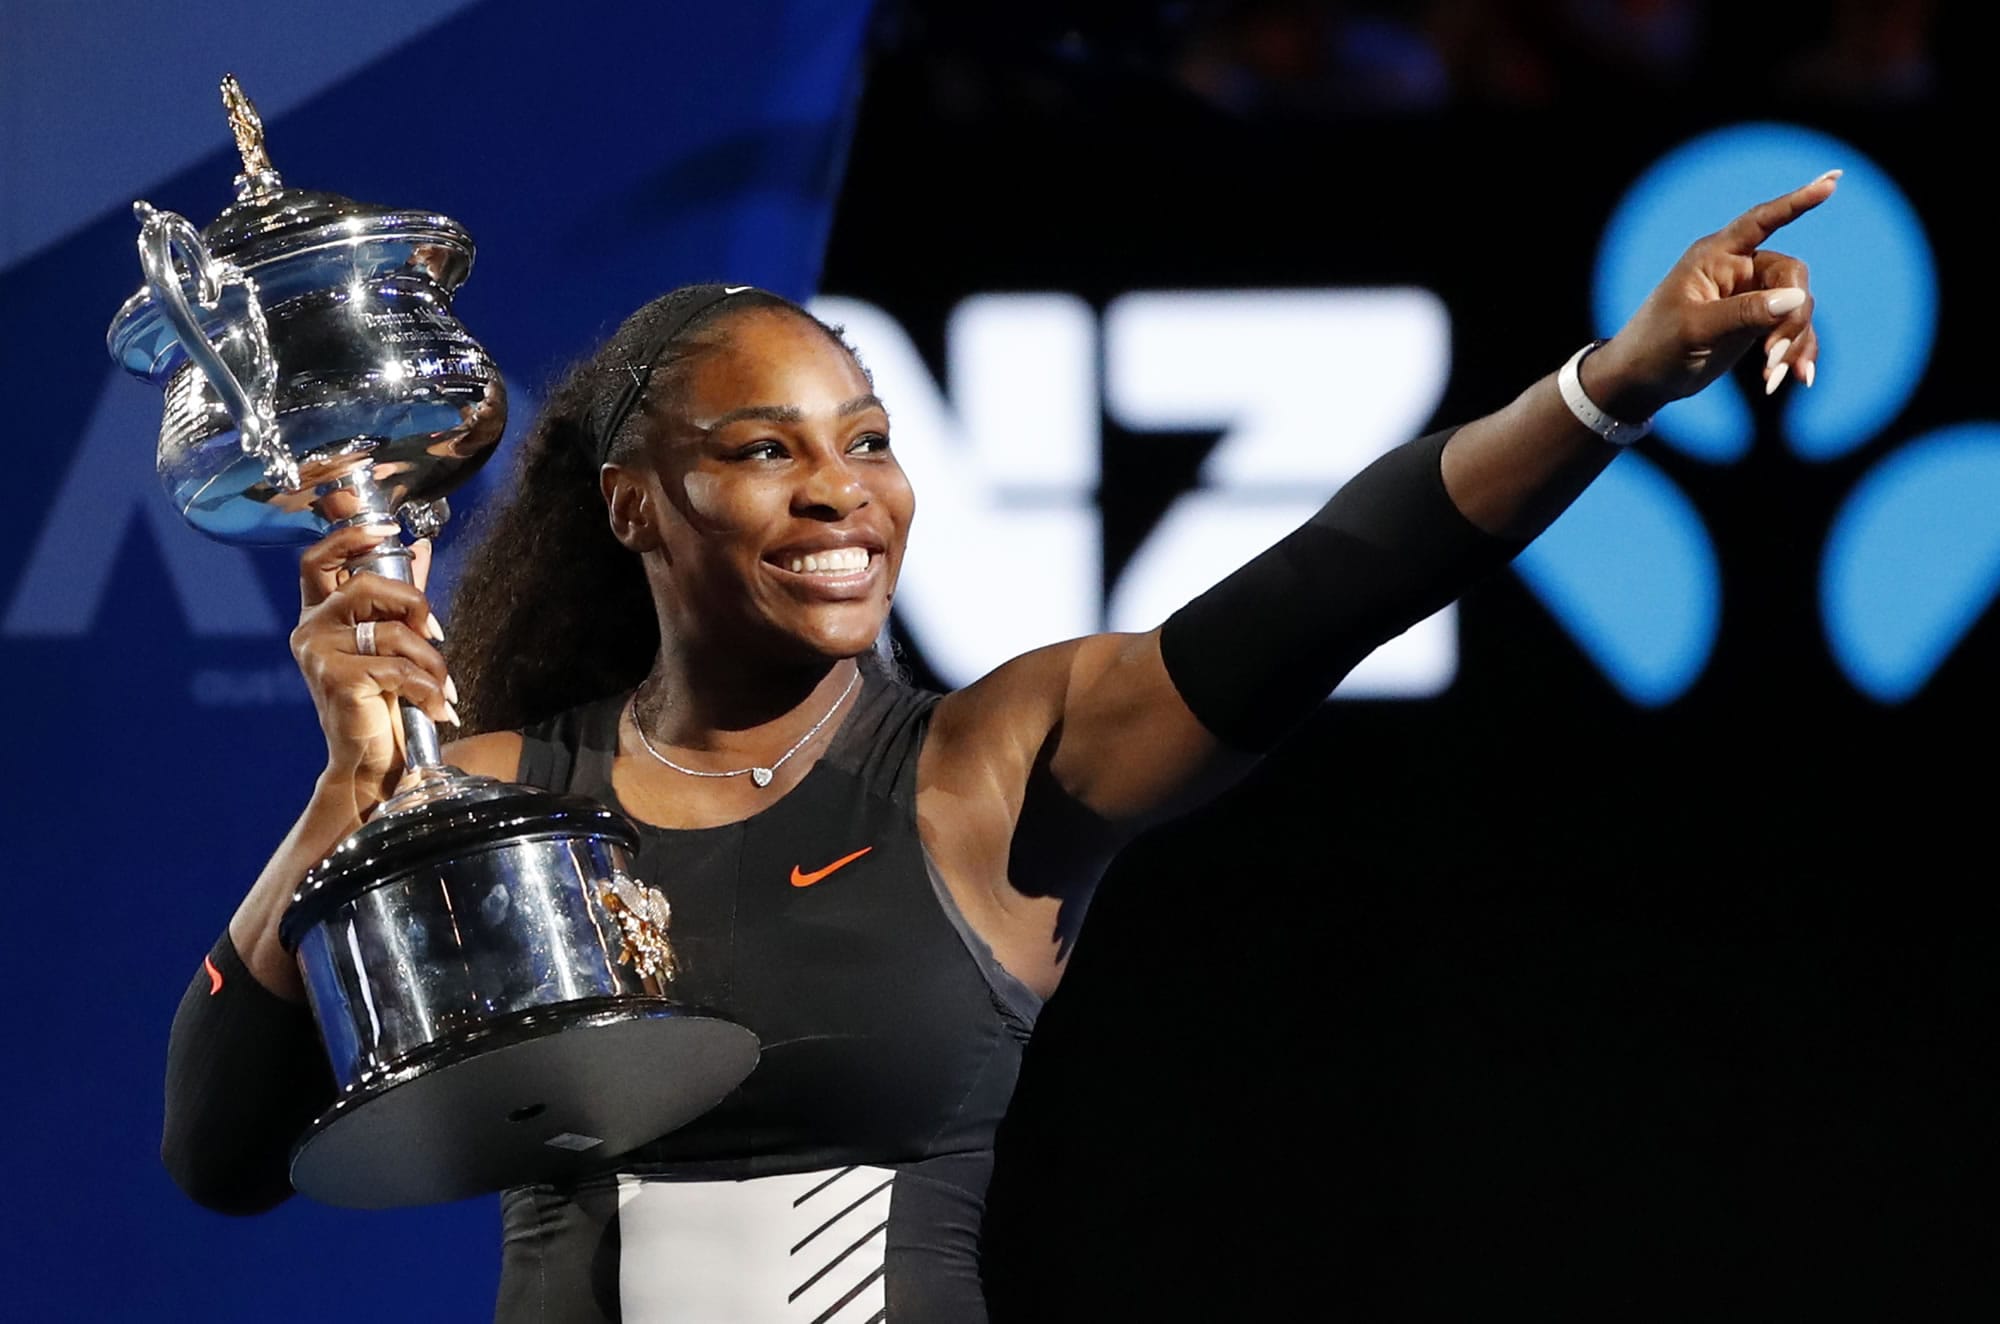 United States' Serena Williams holds her trophy after defeating her sister Venus during the women's singles final at the Australian Open tennis championships in Melbourne, Australia, Saturday, Jan. 28, 2017.